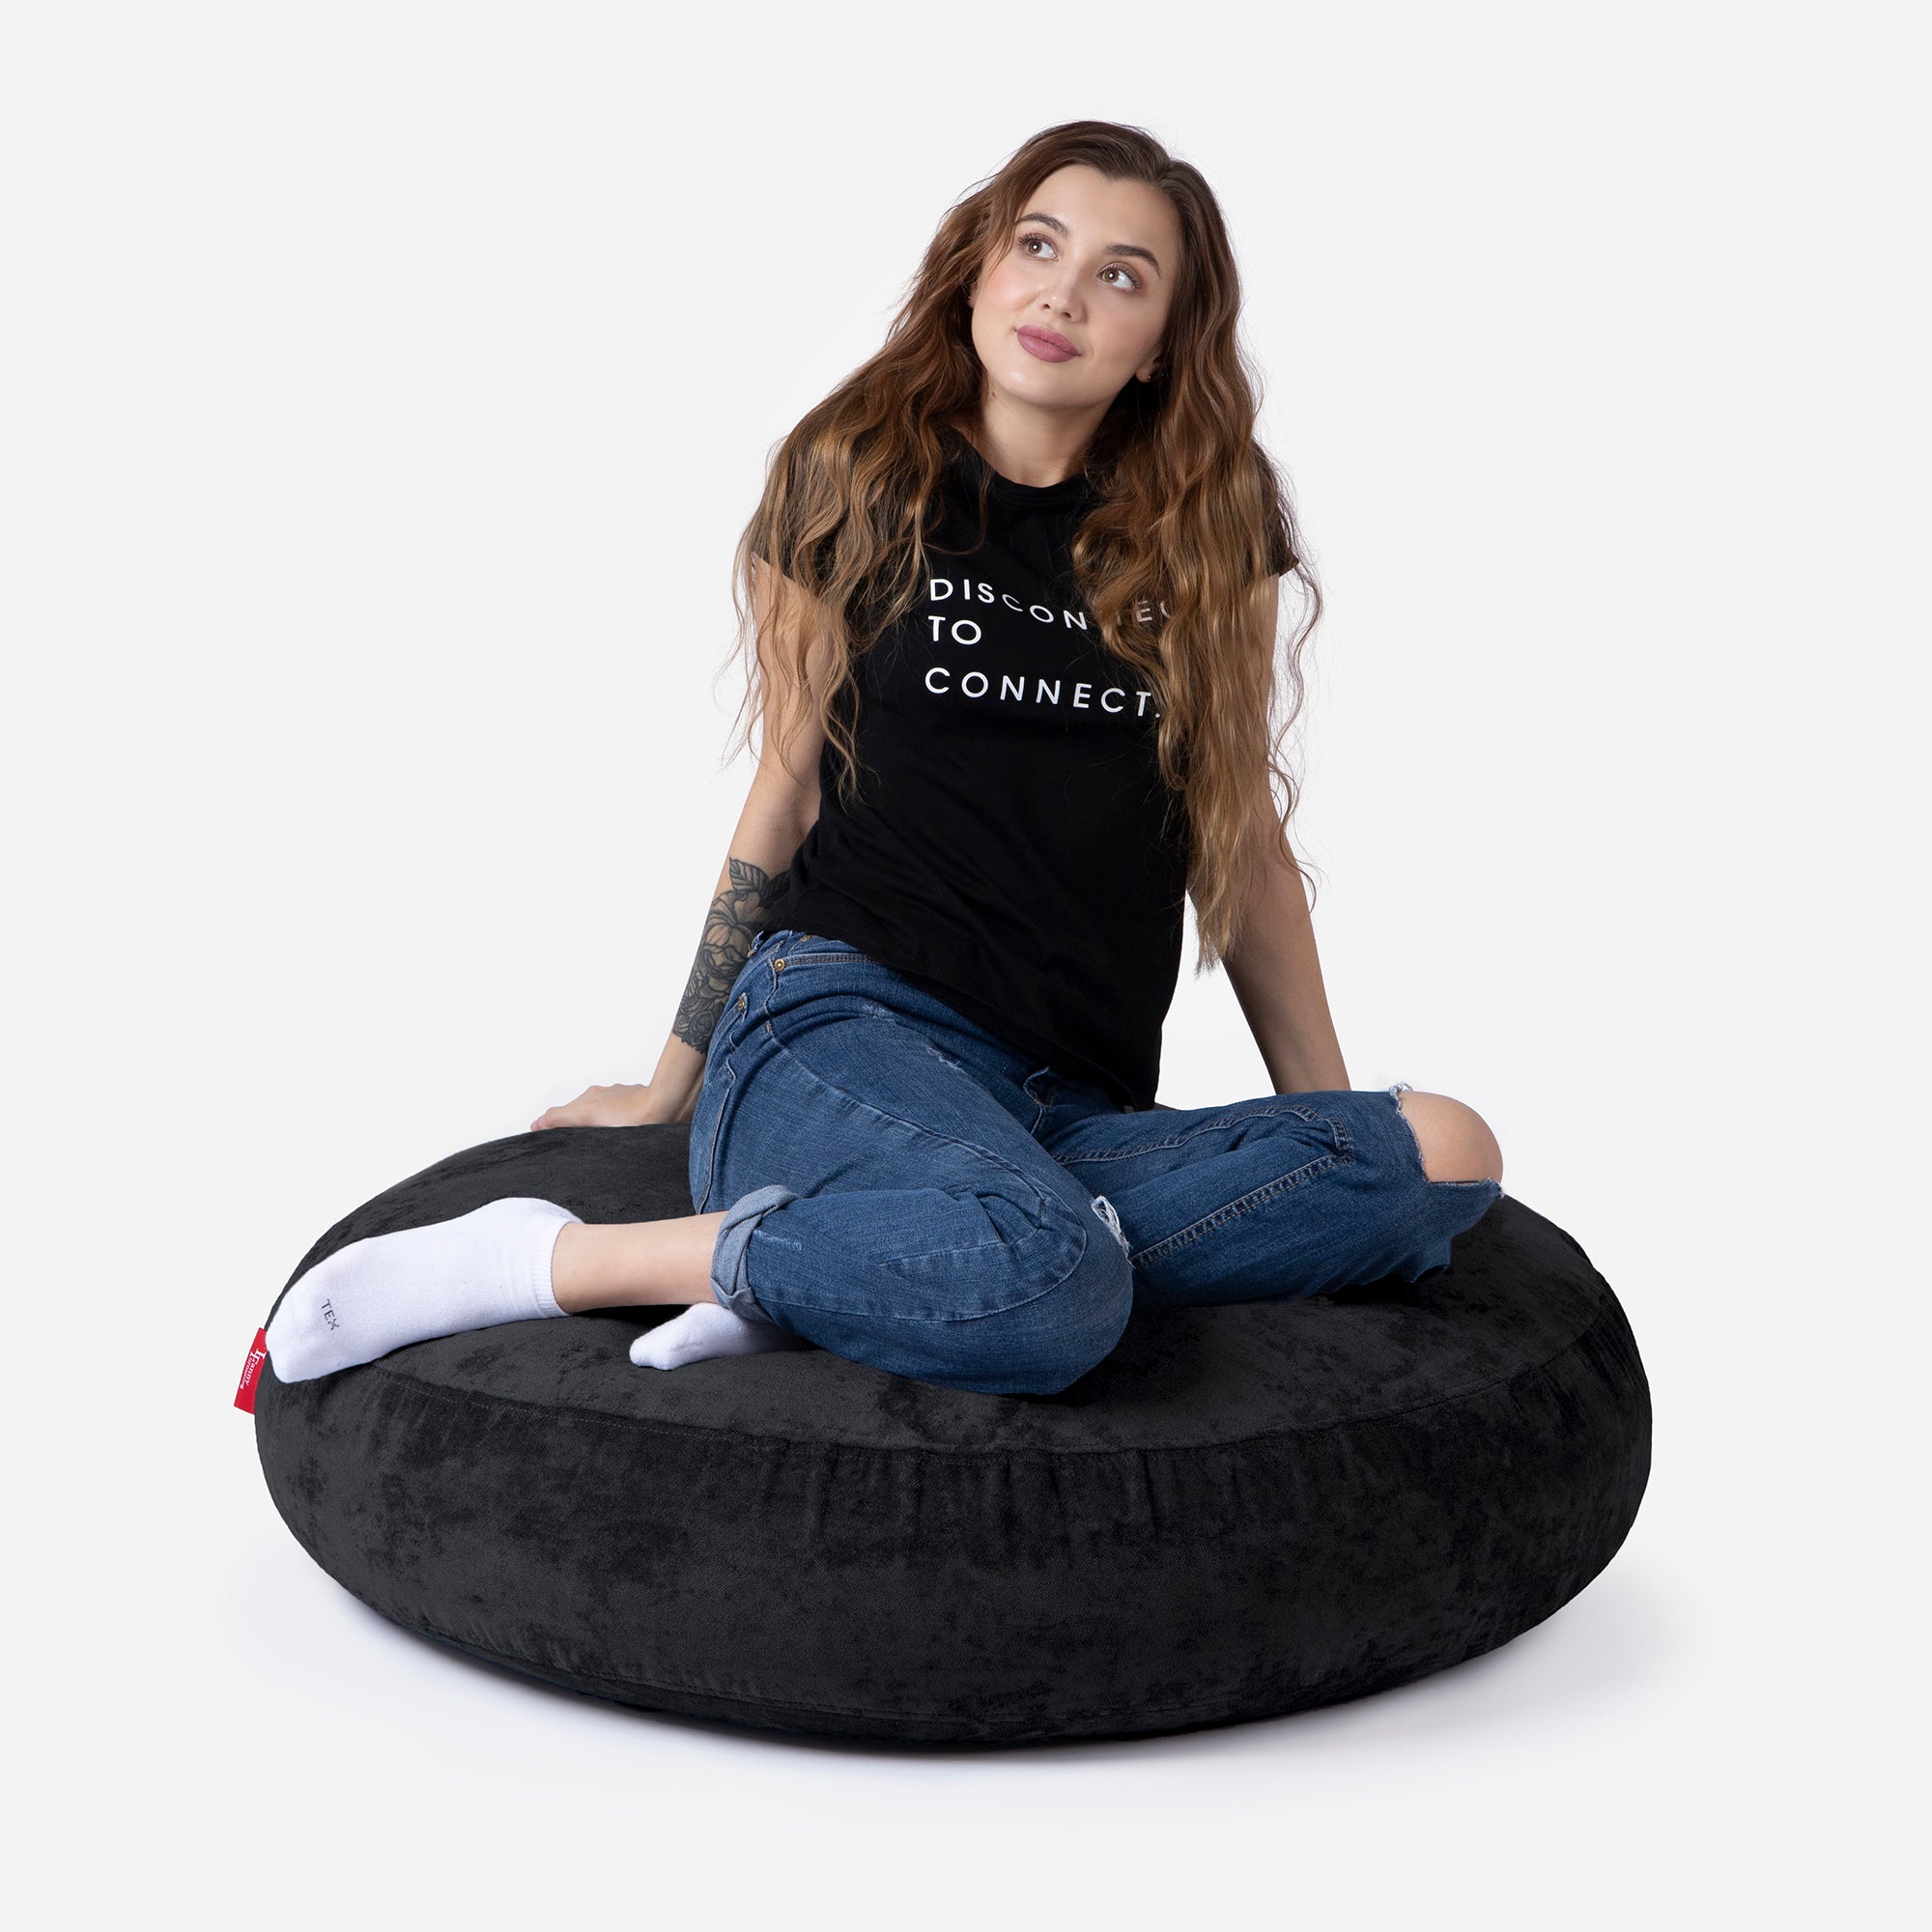 Pouf, Ottoman Black color by Lanny with girl seating on it 